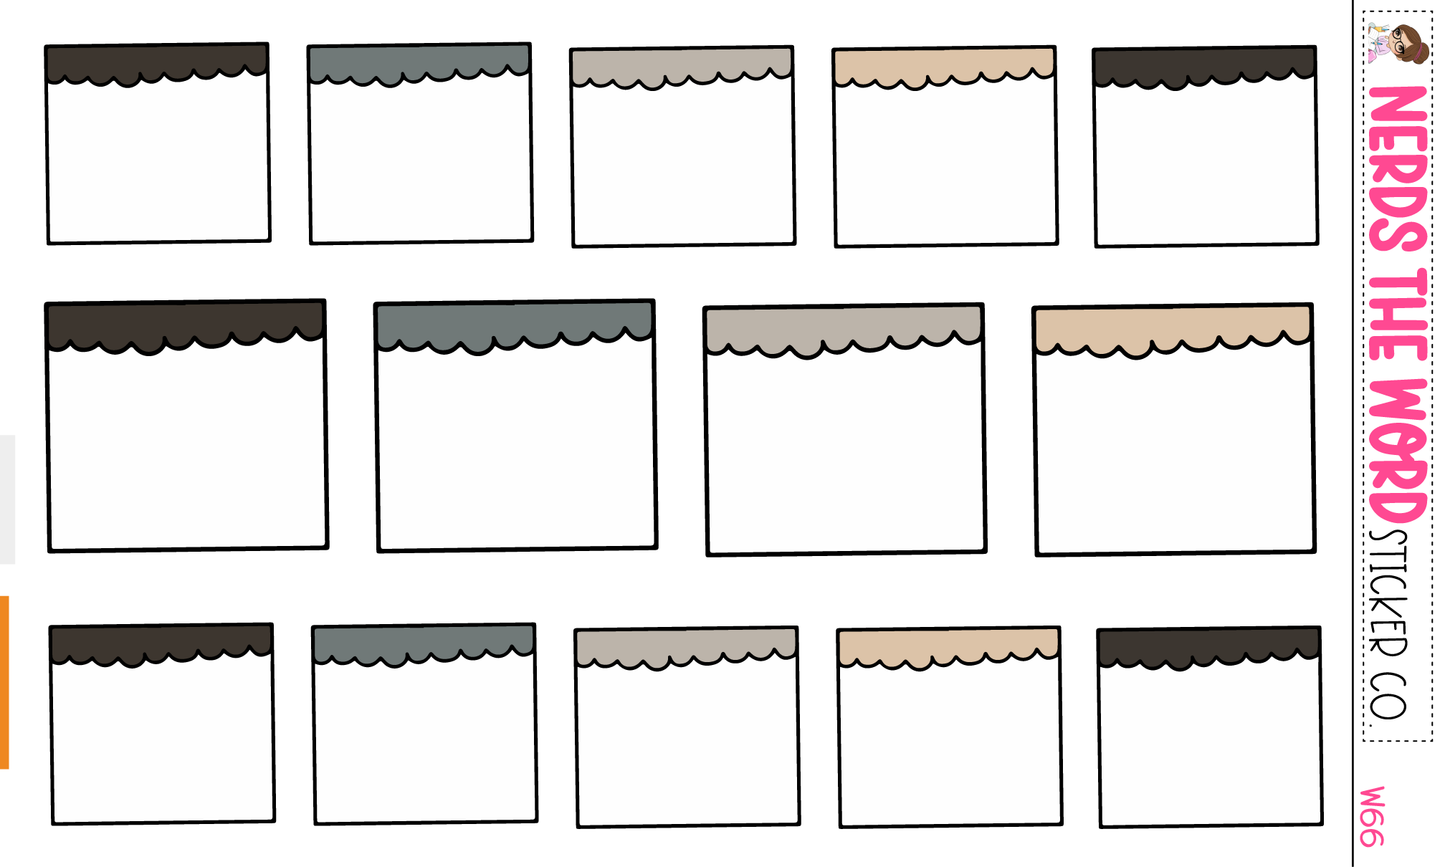 Stone Doodled Functional Sticker Sheets - You Choose